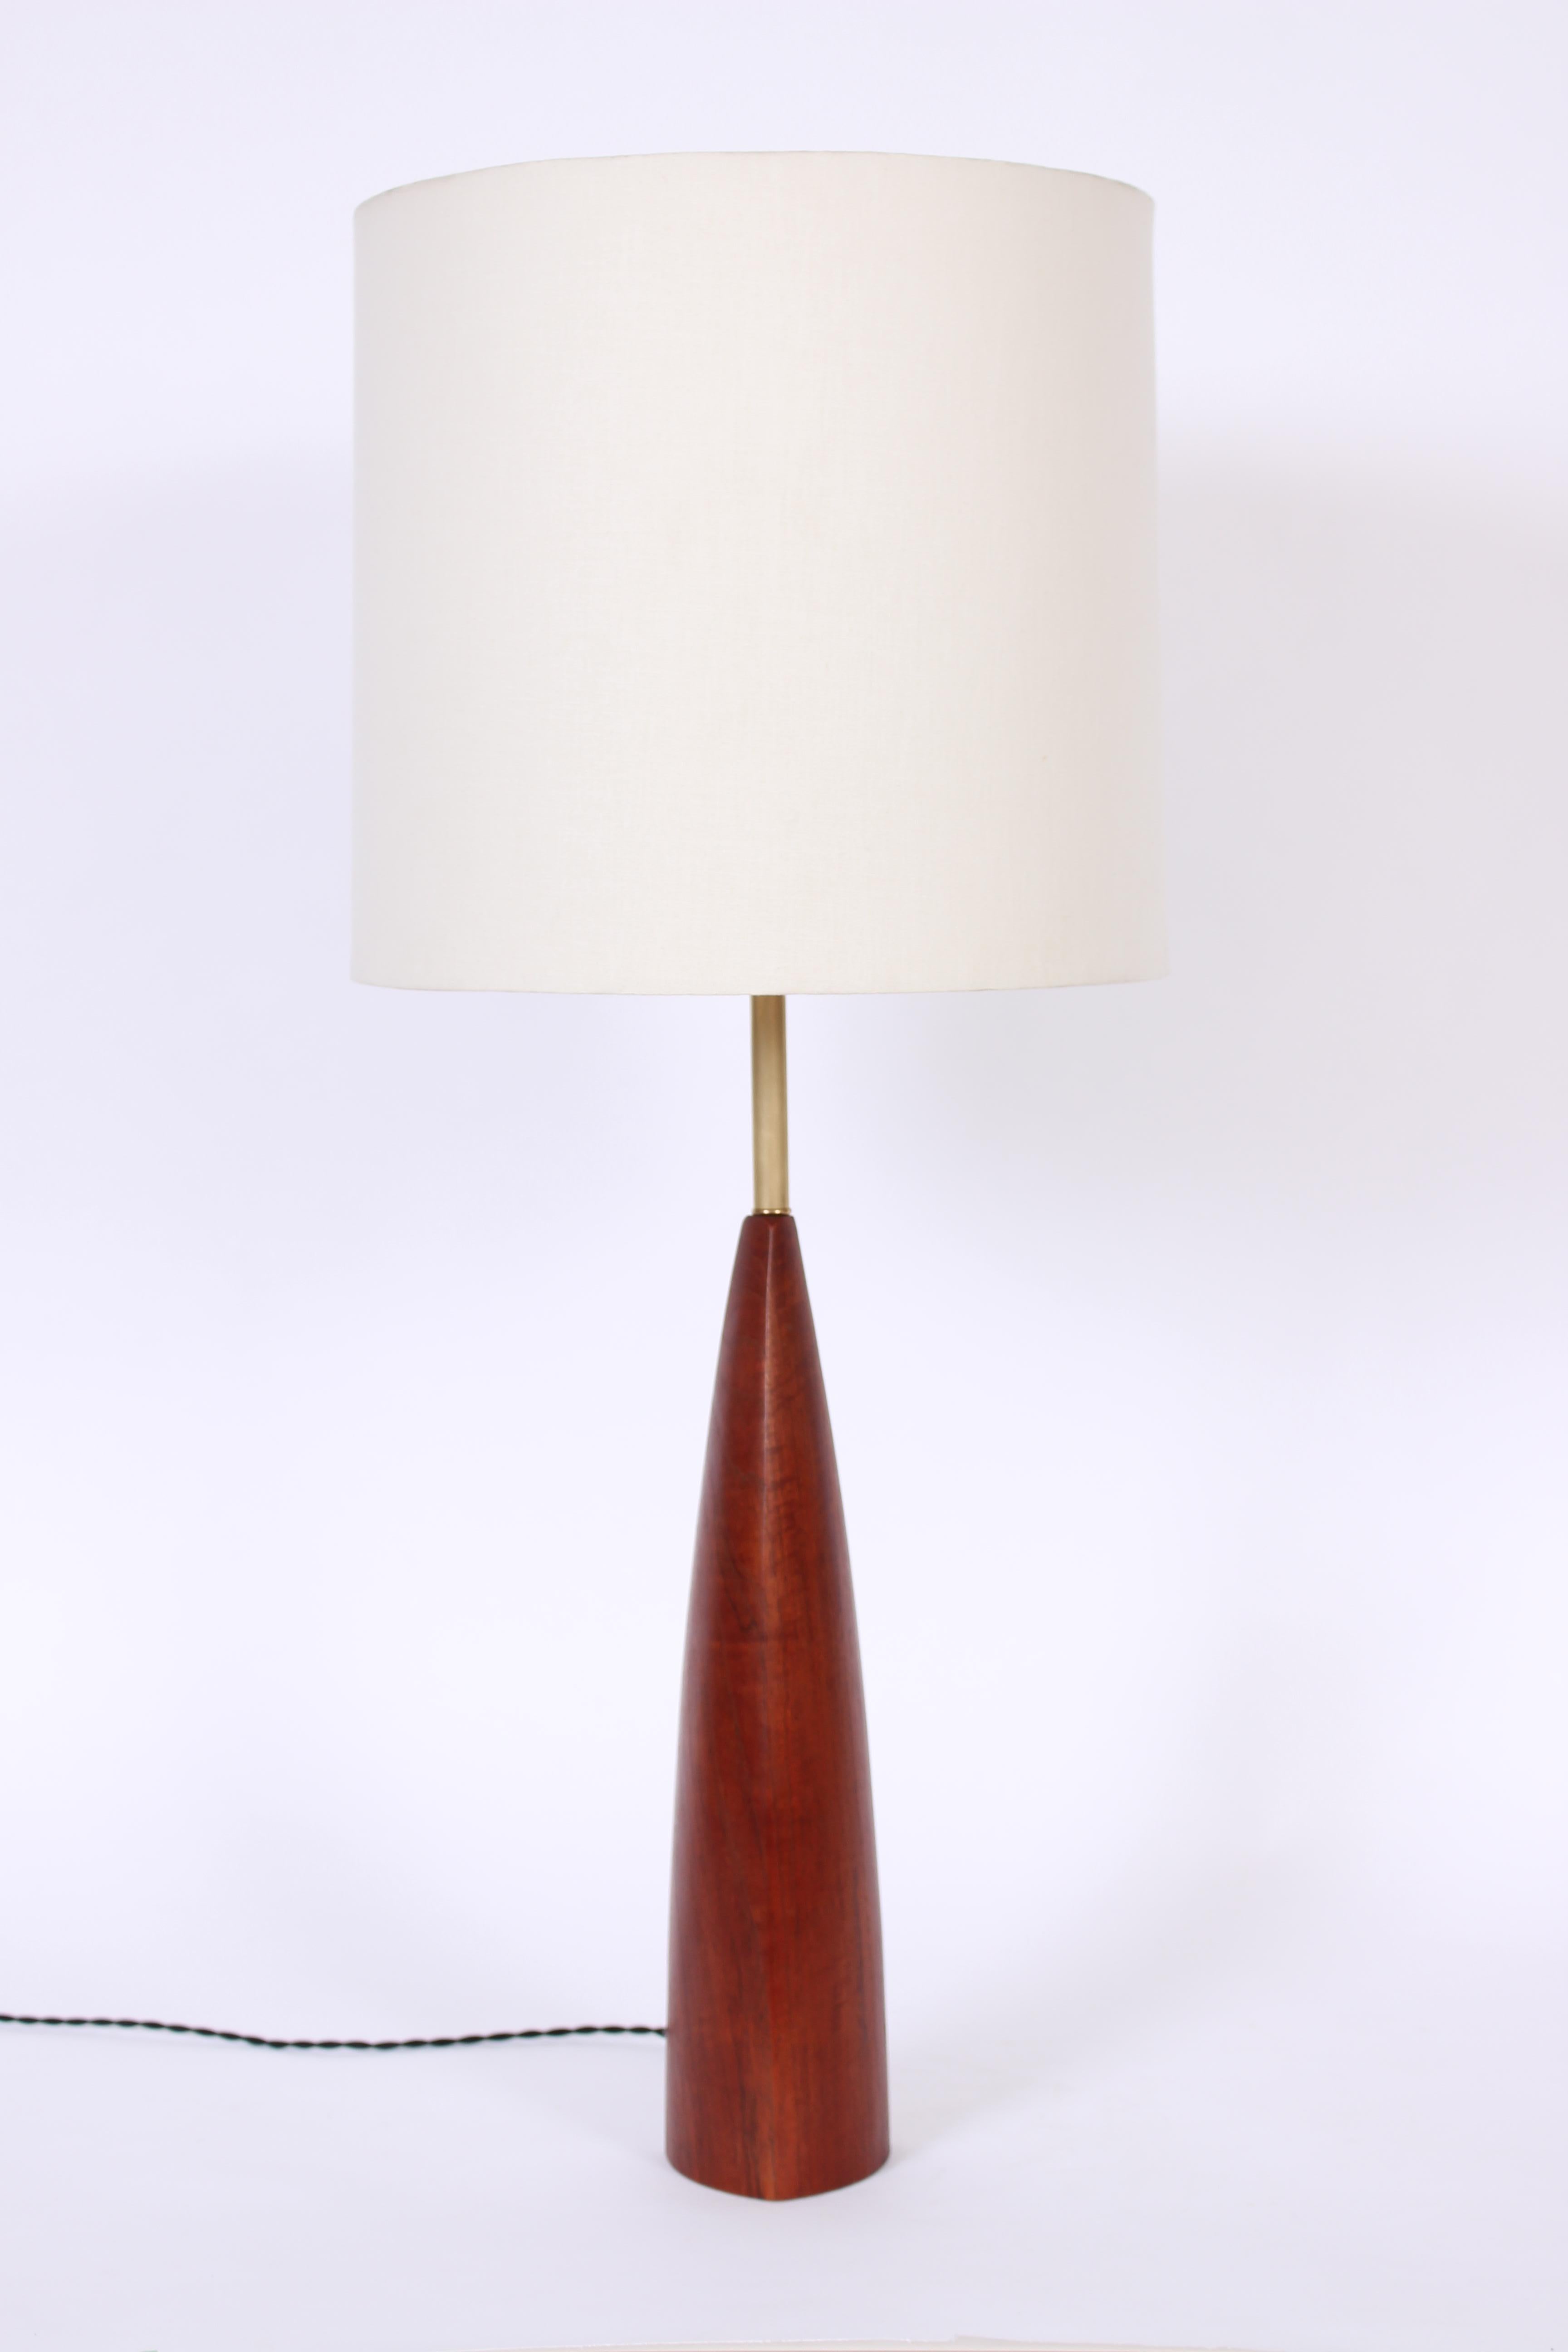 Danish Mid Century Ernst Henriksen Teak and Brass Table Lamp. With Brass shaft and weighted cast iron base. Standard socket. Small footprint. 26H to top of socket. Teak 17H. Shade shown for display only (13H x 13D top x 14D bottom). Timeless. Danish